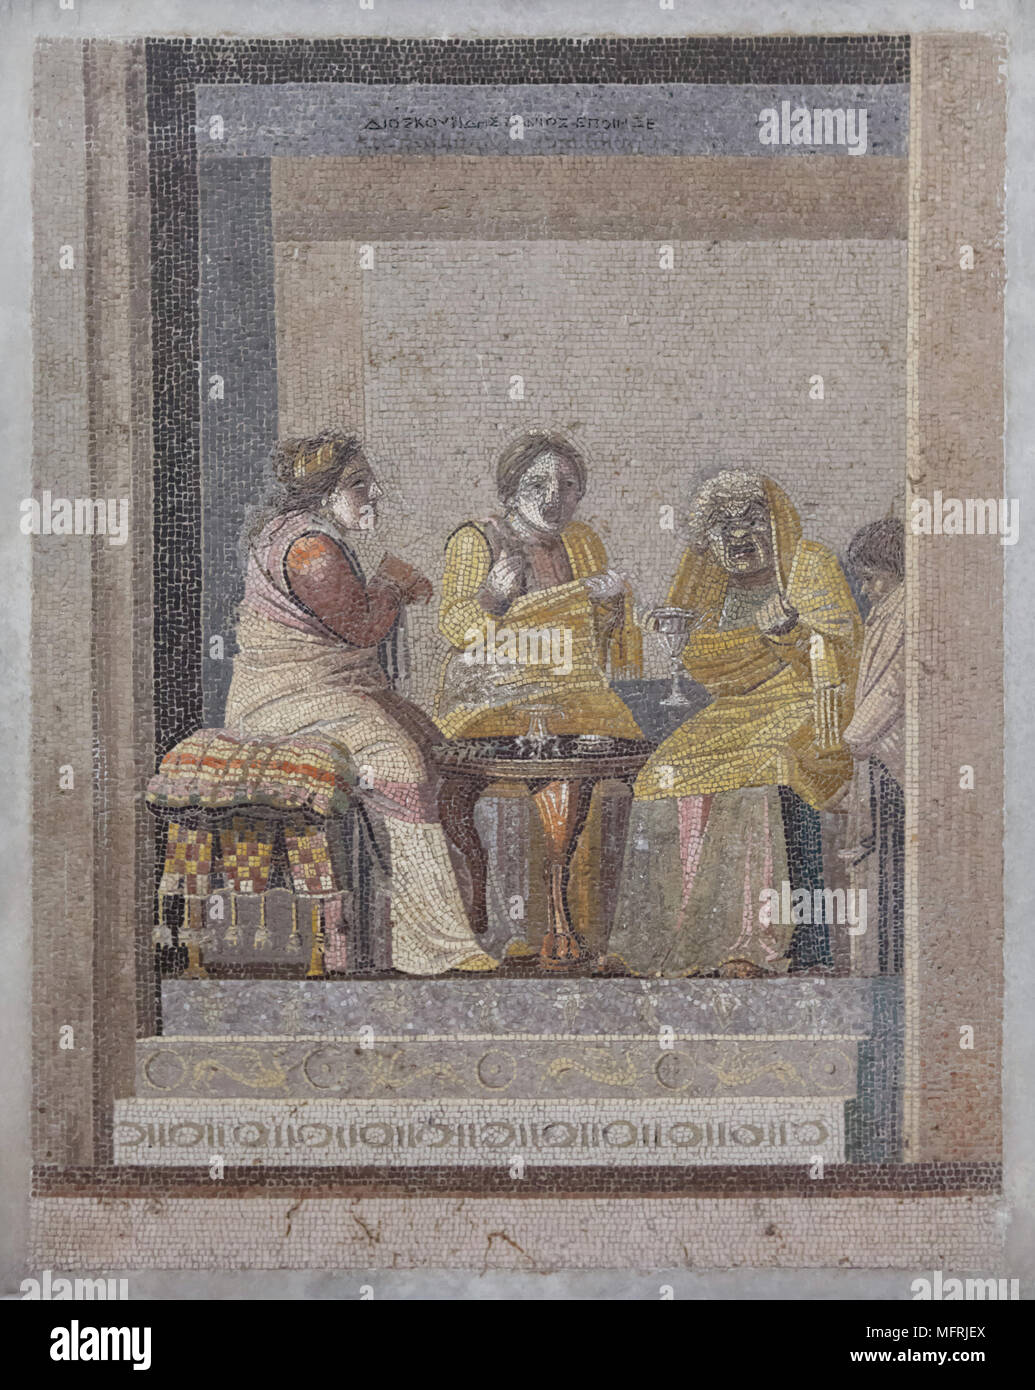 Comedy scene depicted in the Roman mosaic from Villa de Cicero (Villa of Cicero) in Pompeii, now on display in the National Archaeological Museum (Museo Archeologico Nazionale di Napoli) in Naples, Campania, Italy. Two women consulting with a witch are depicted in the mosaic. Signature on the top: signed by Dioskourides of Samos. Stock Photo